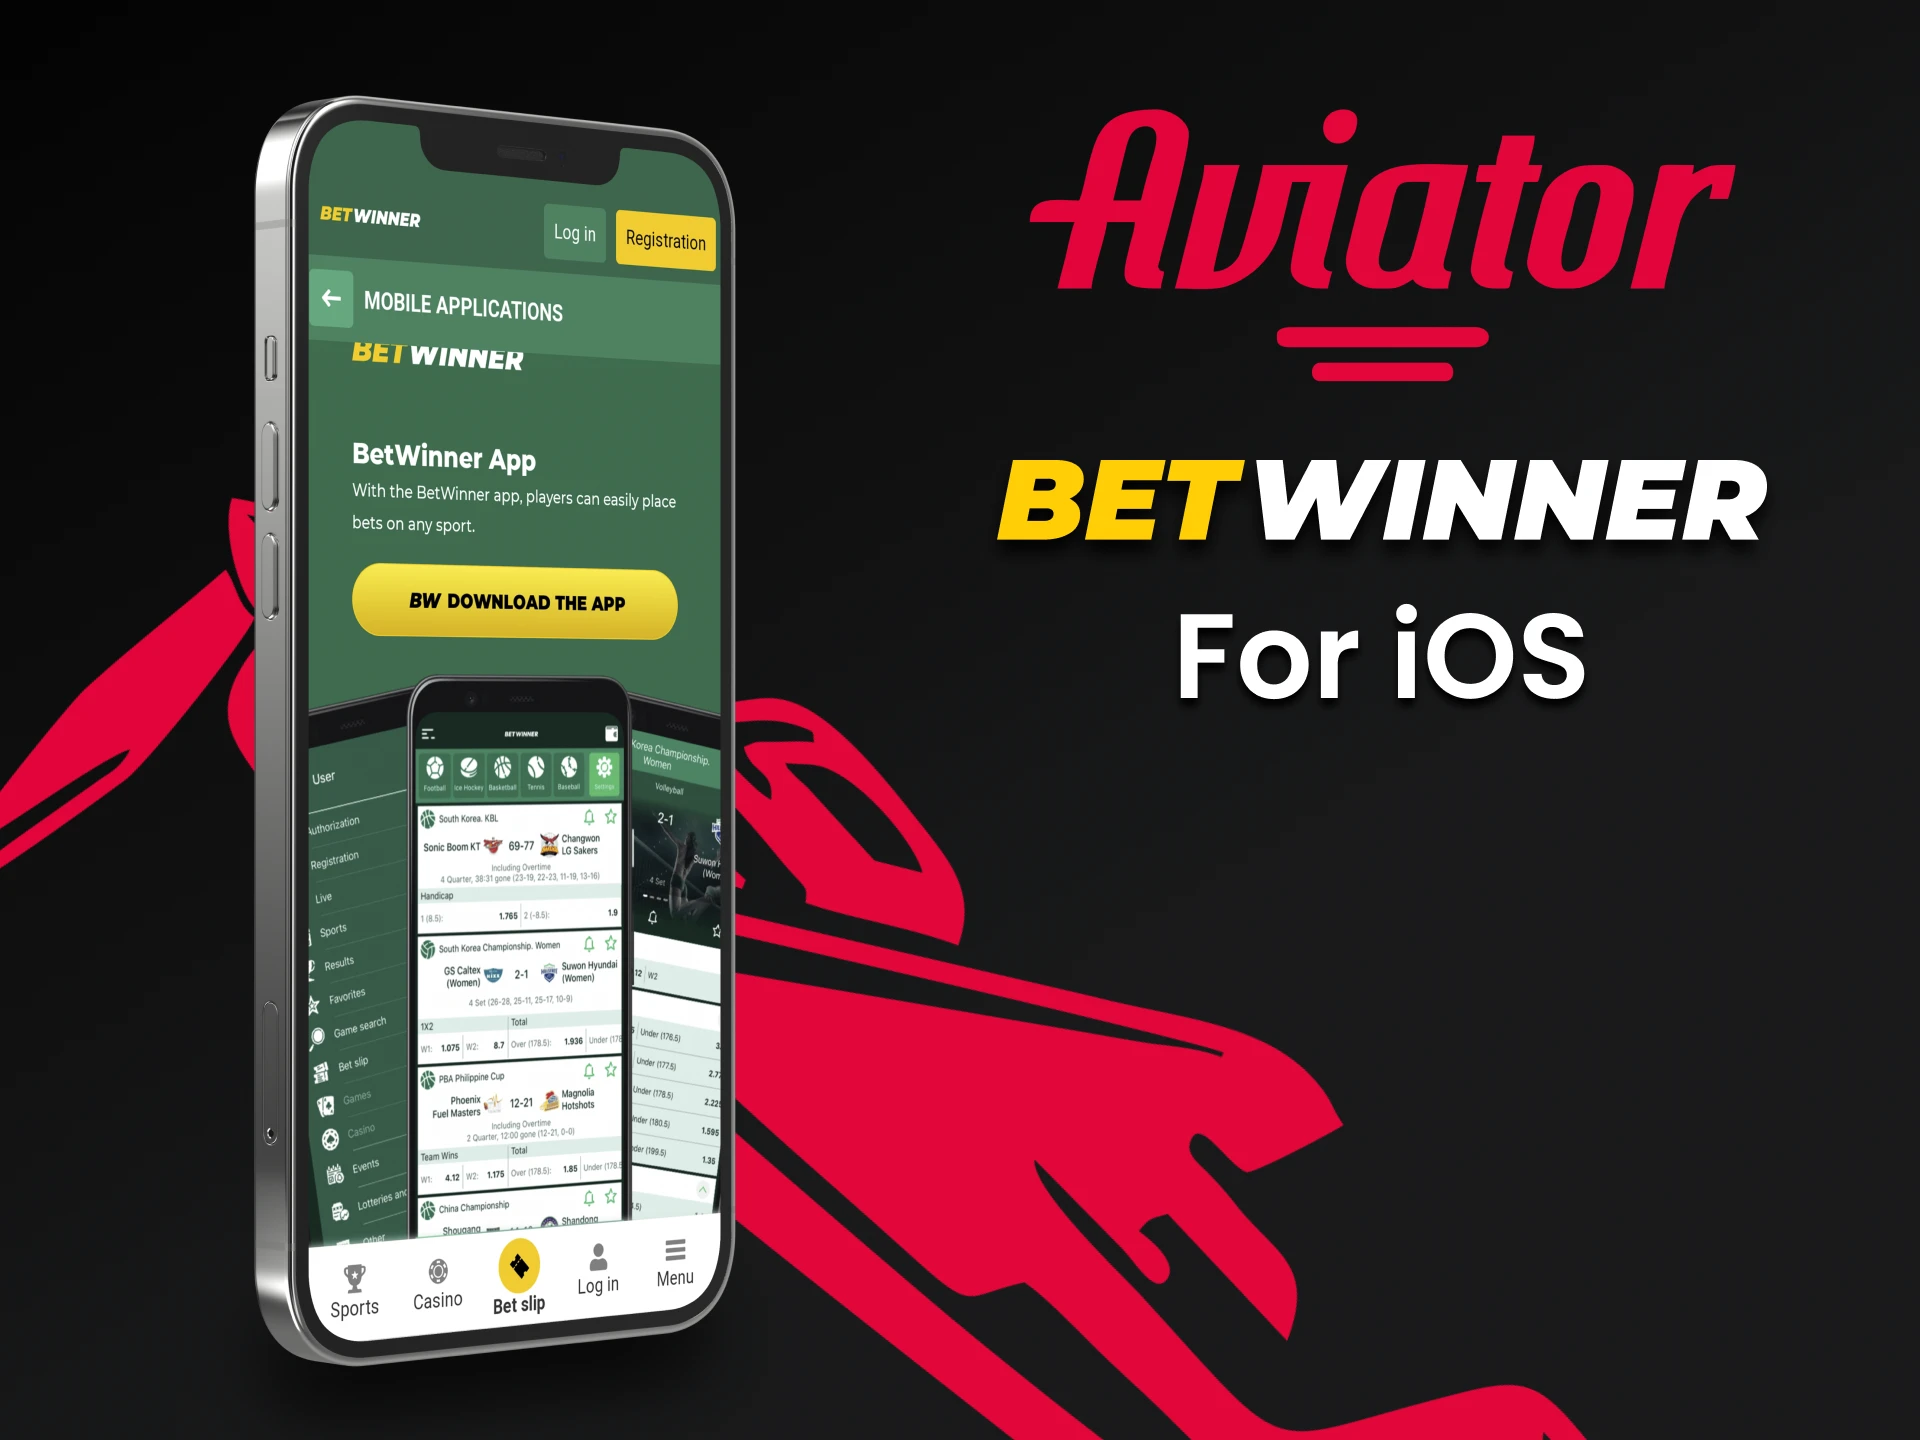 Download the Betwinner app to play Aviator on iOS.